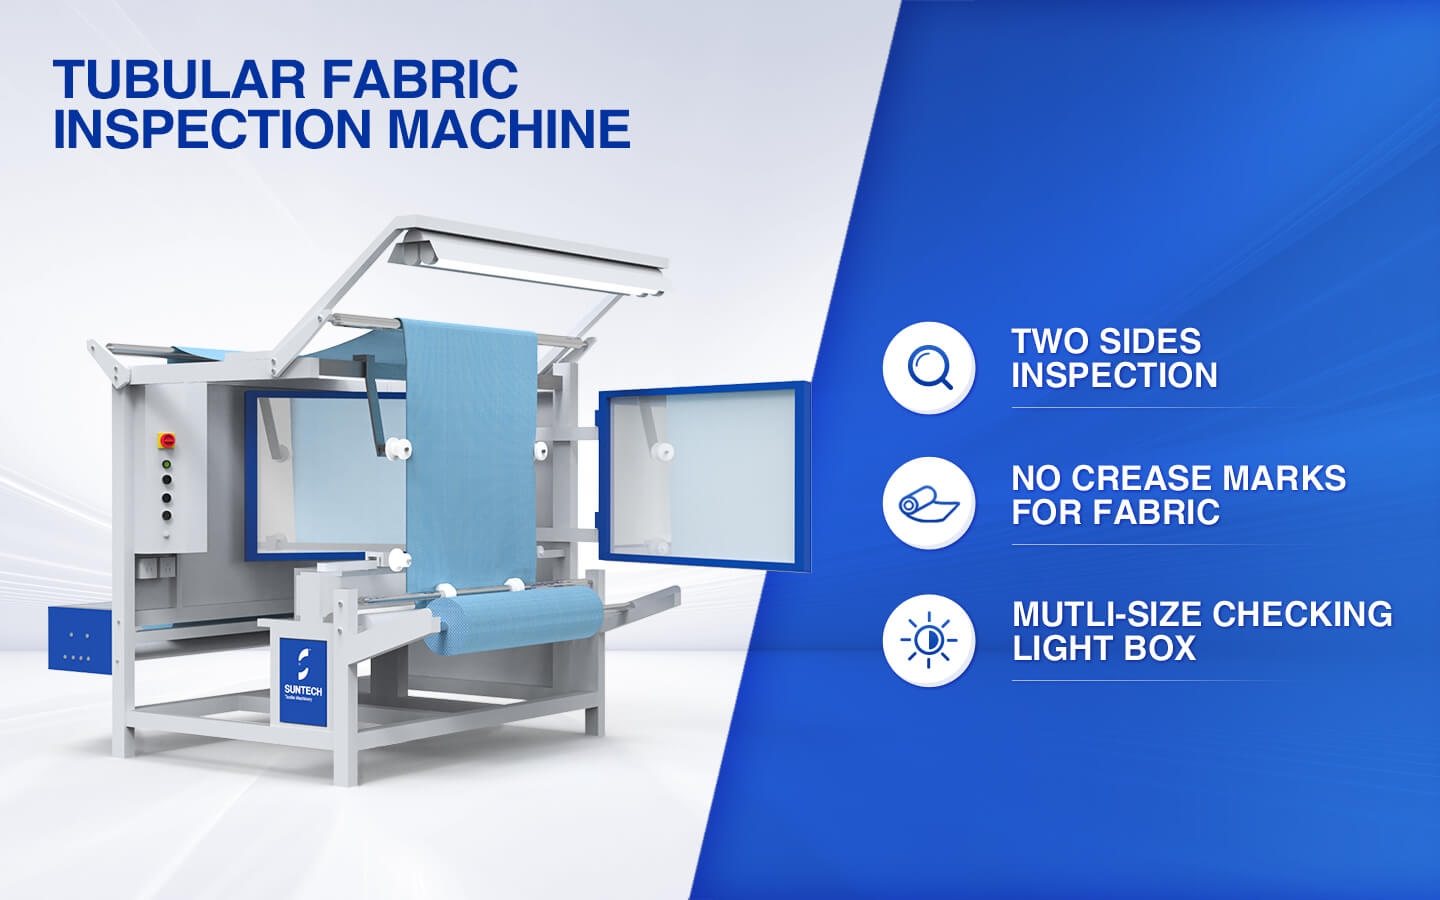 Tubular Fabric Inspection Machine features